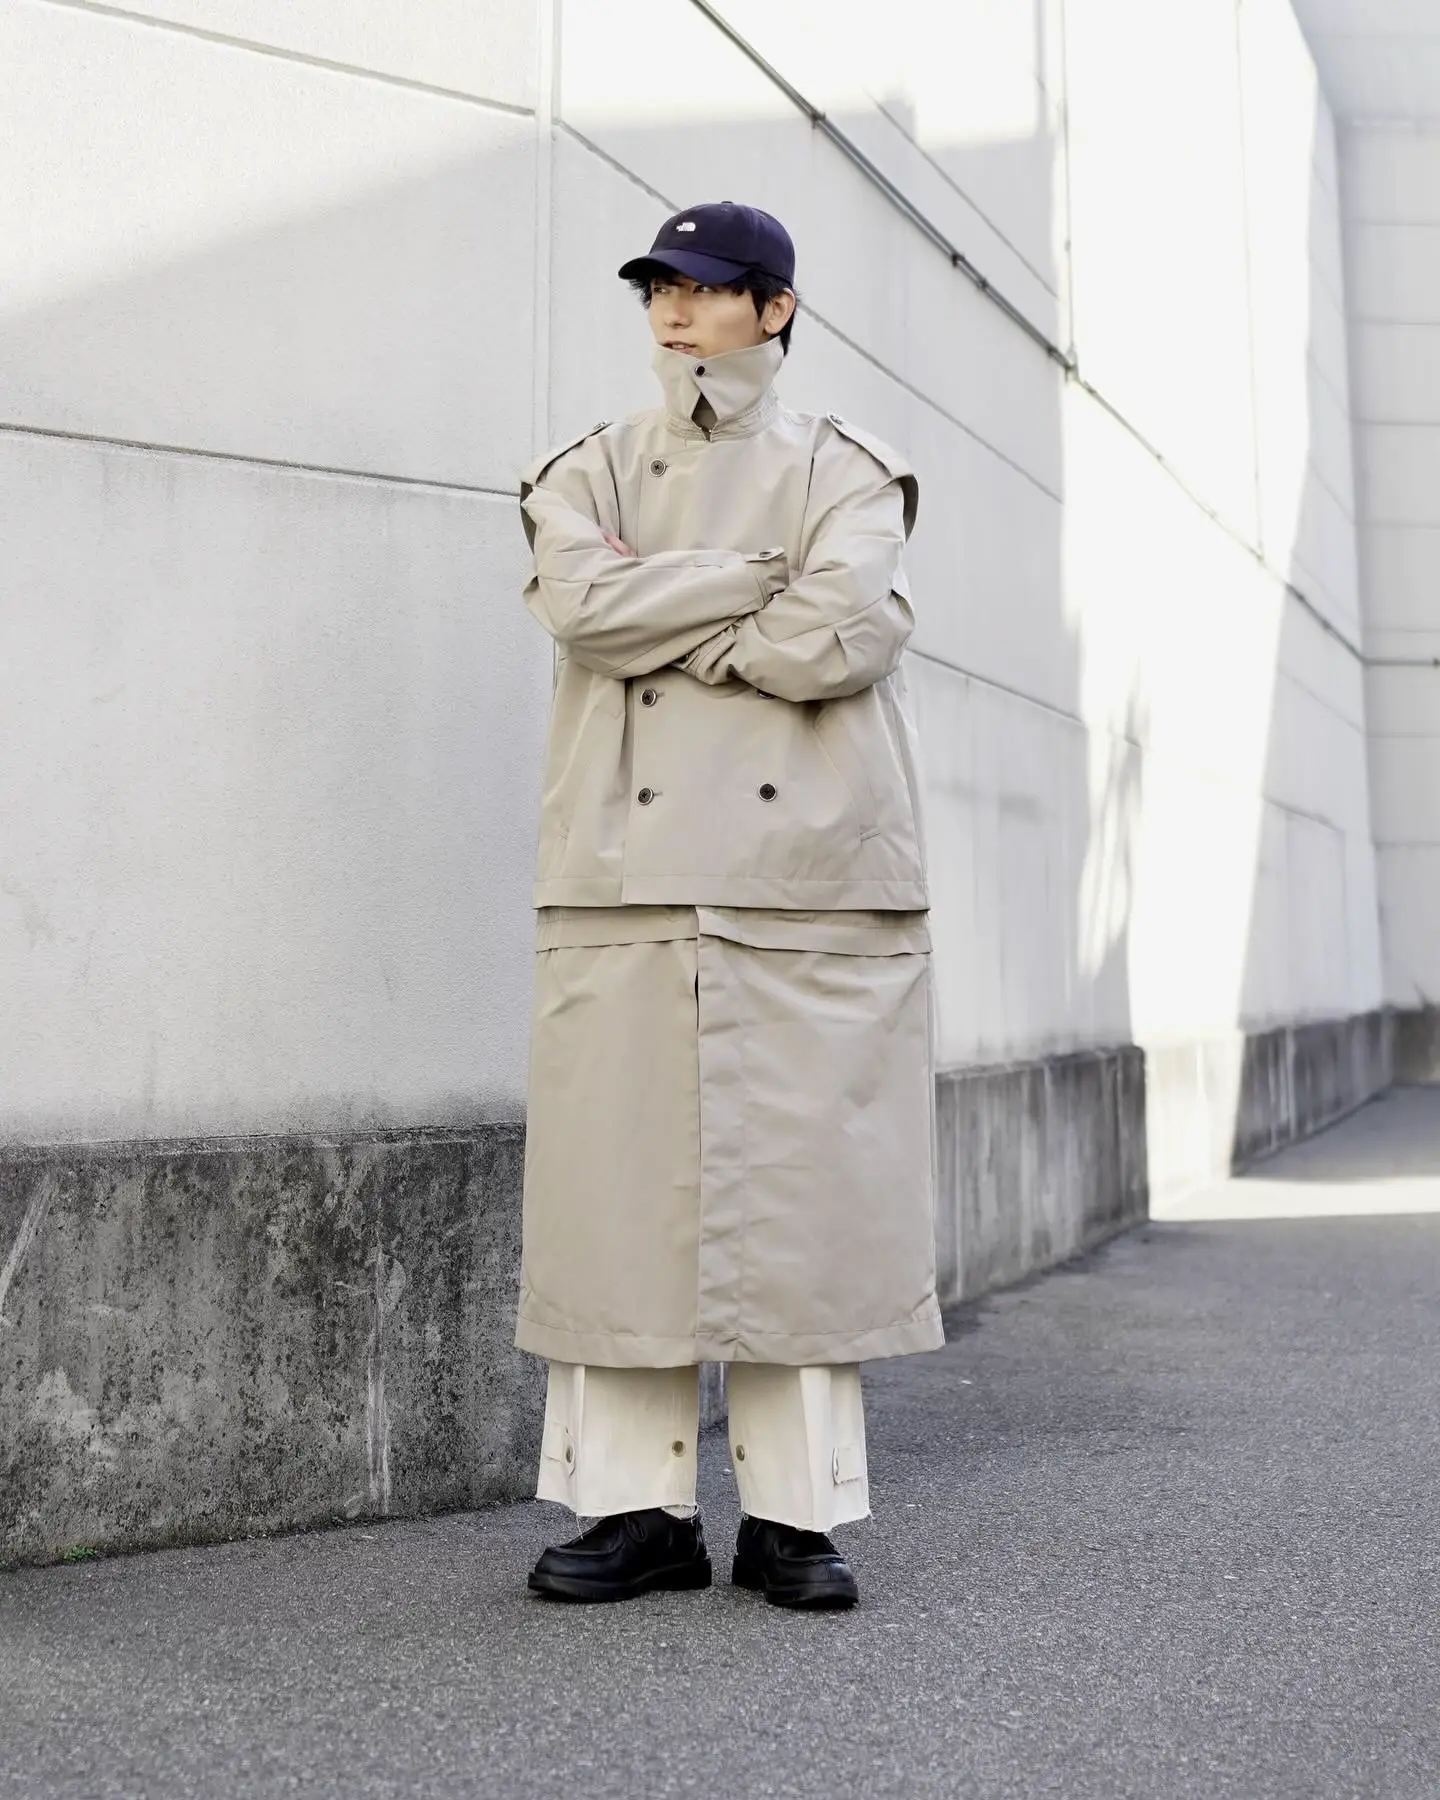 7WAY SpringCoat🌸 | Gallery posted by ひっち@WEAR | Lemon8